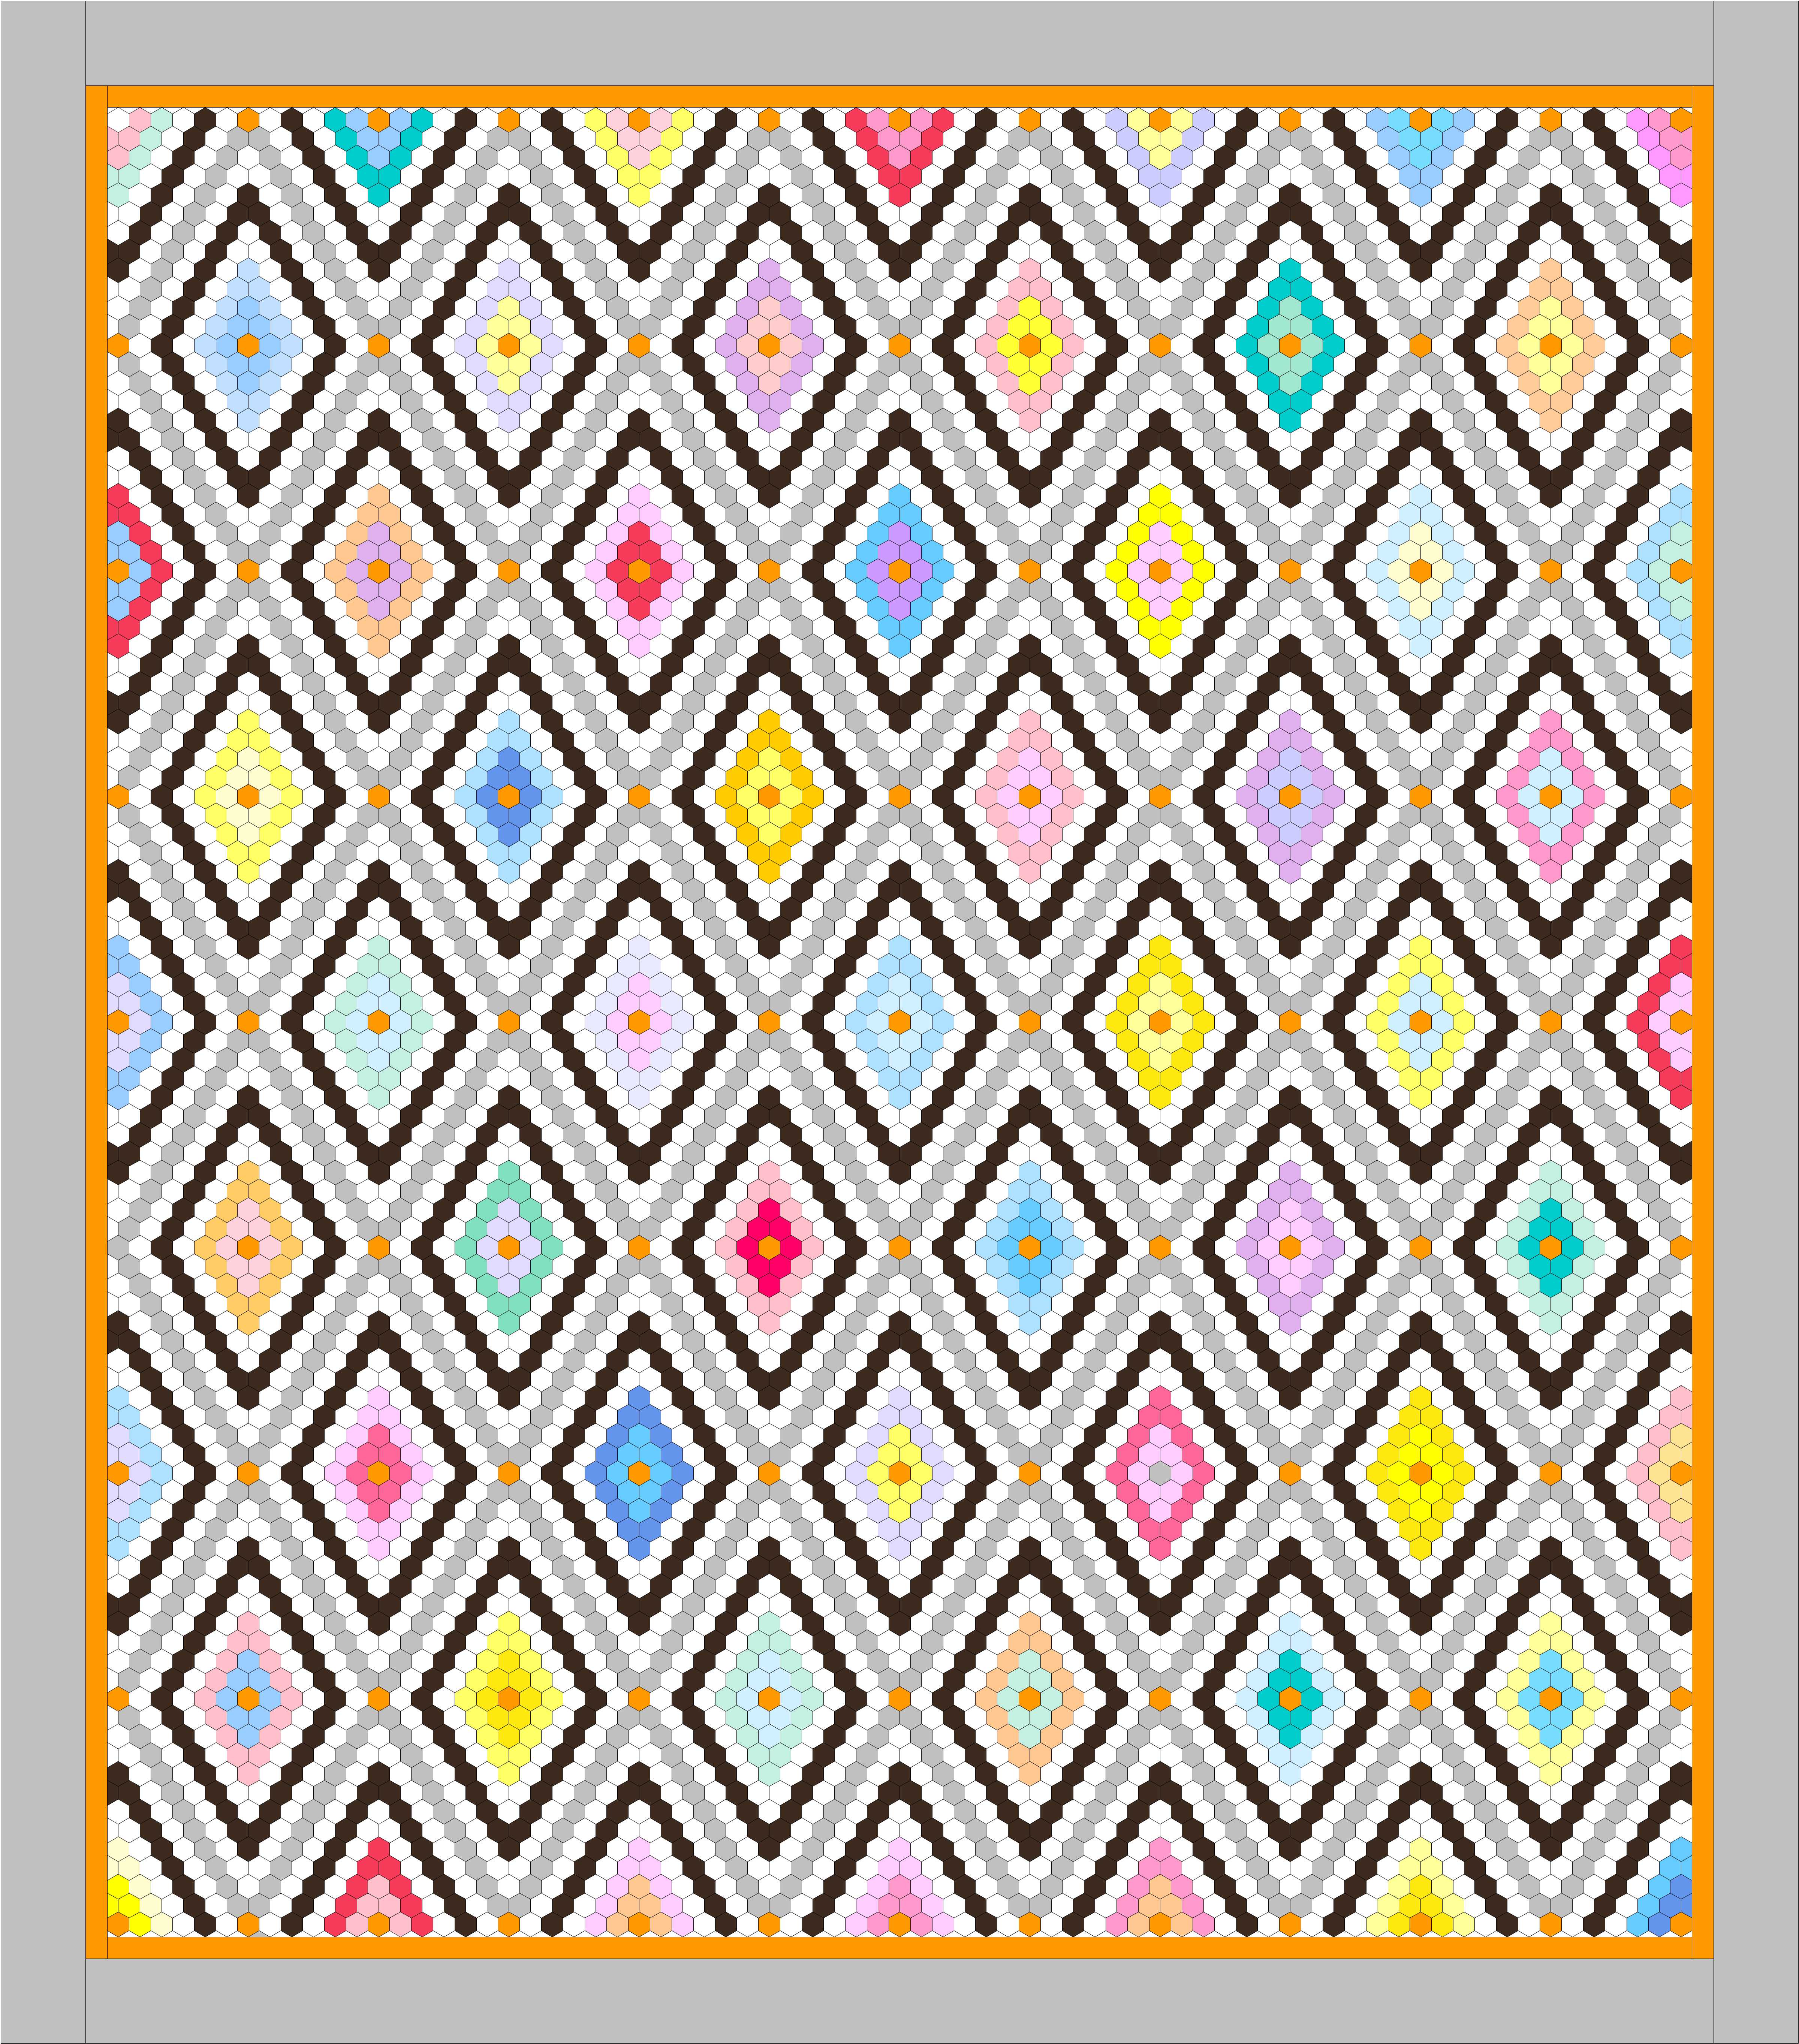 The quilt variation I entered, with gray and black replacing orange and green